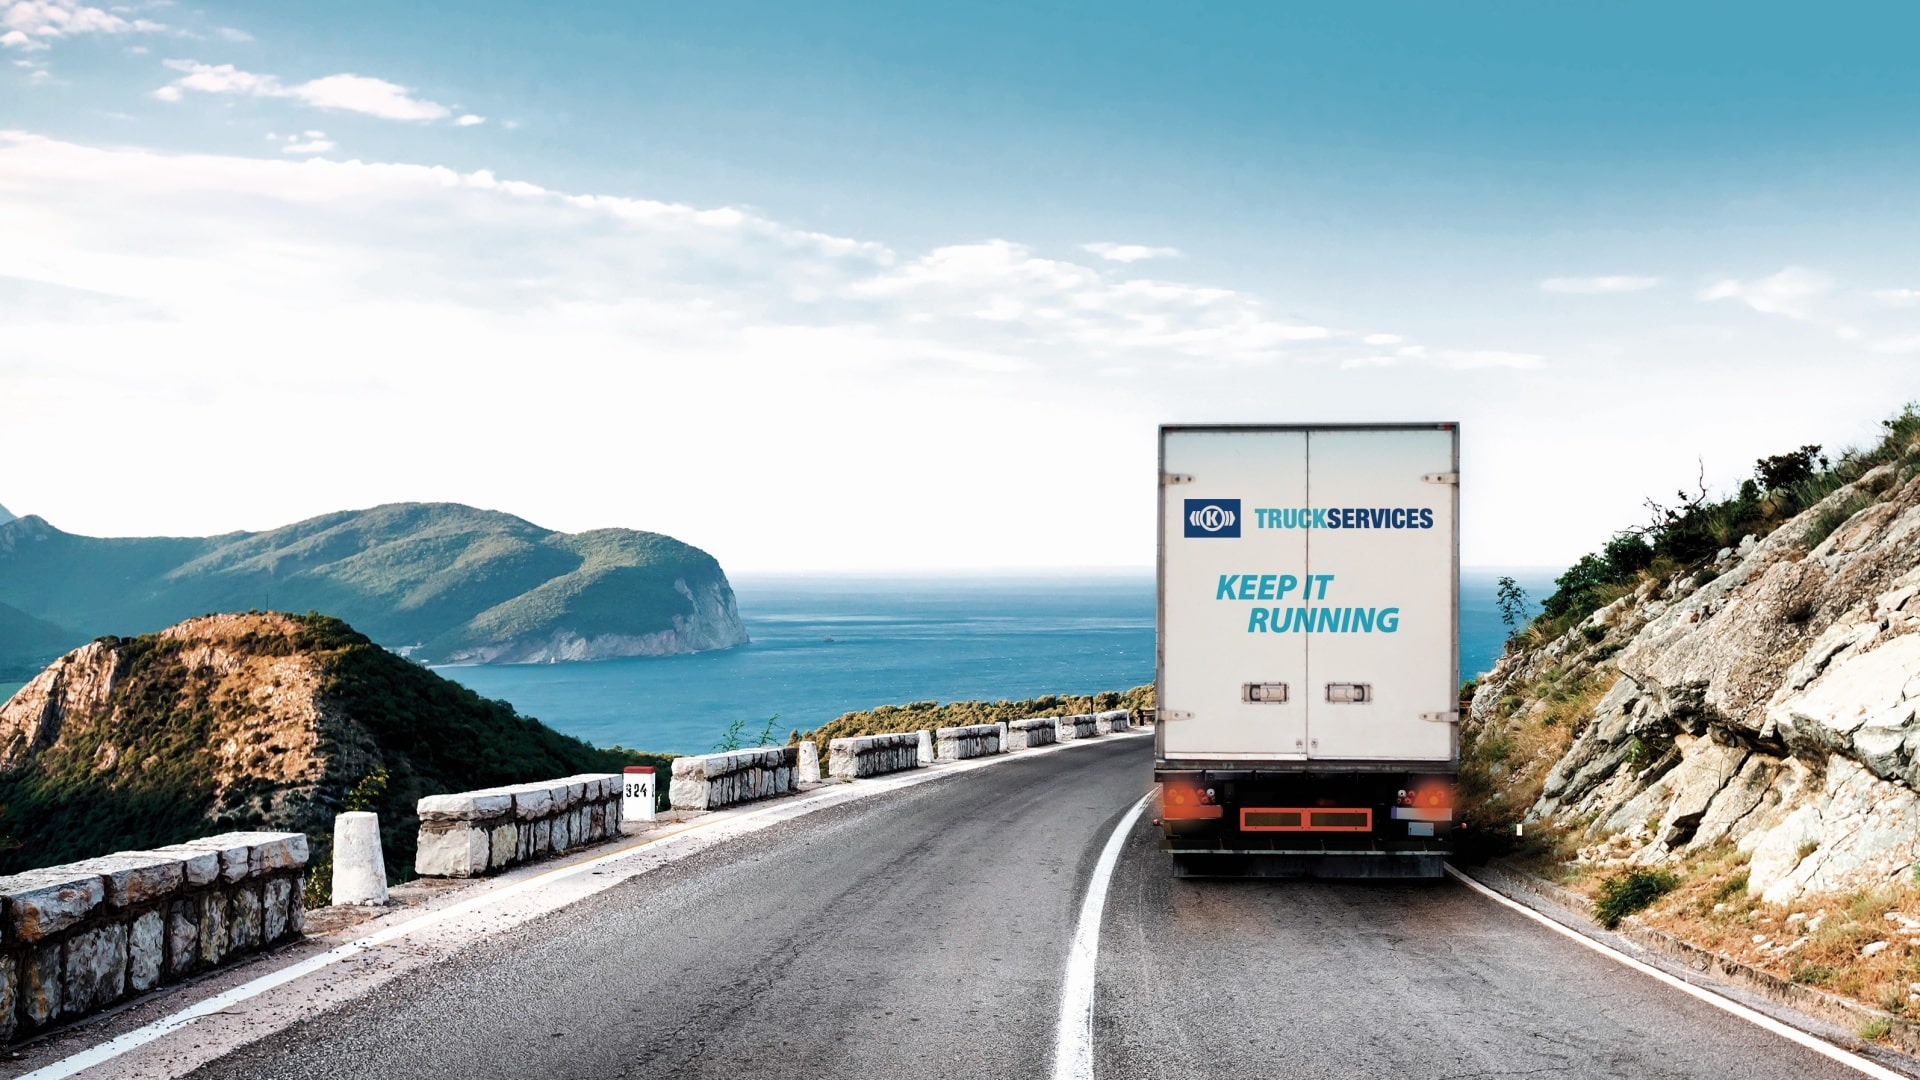 Knorr-Bremse is launching TruckServices in South America